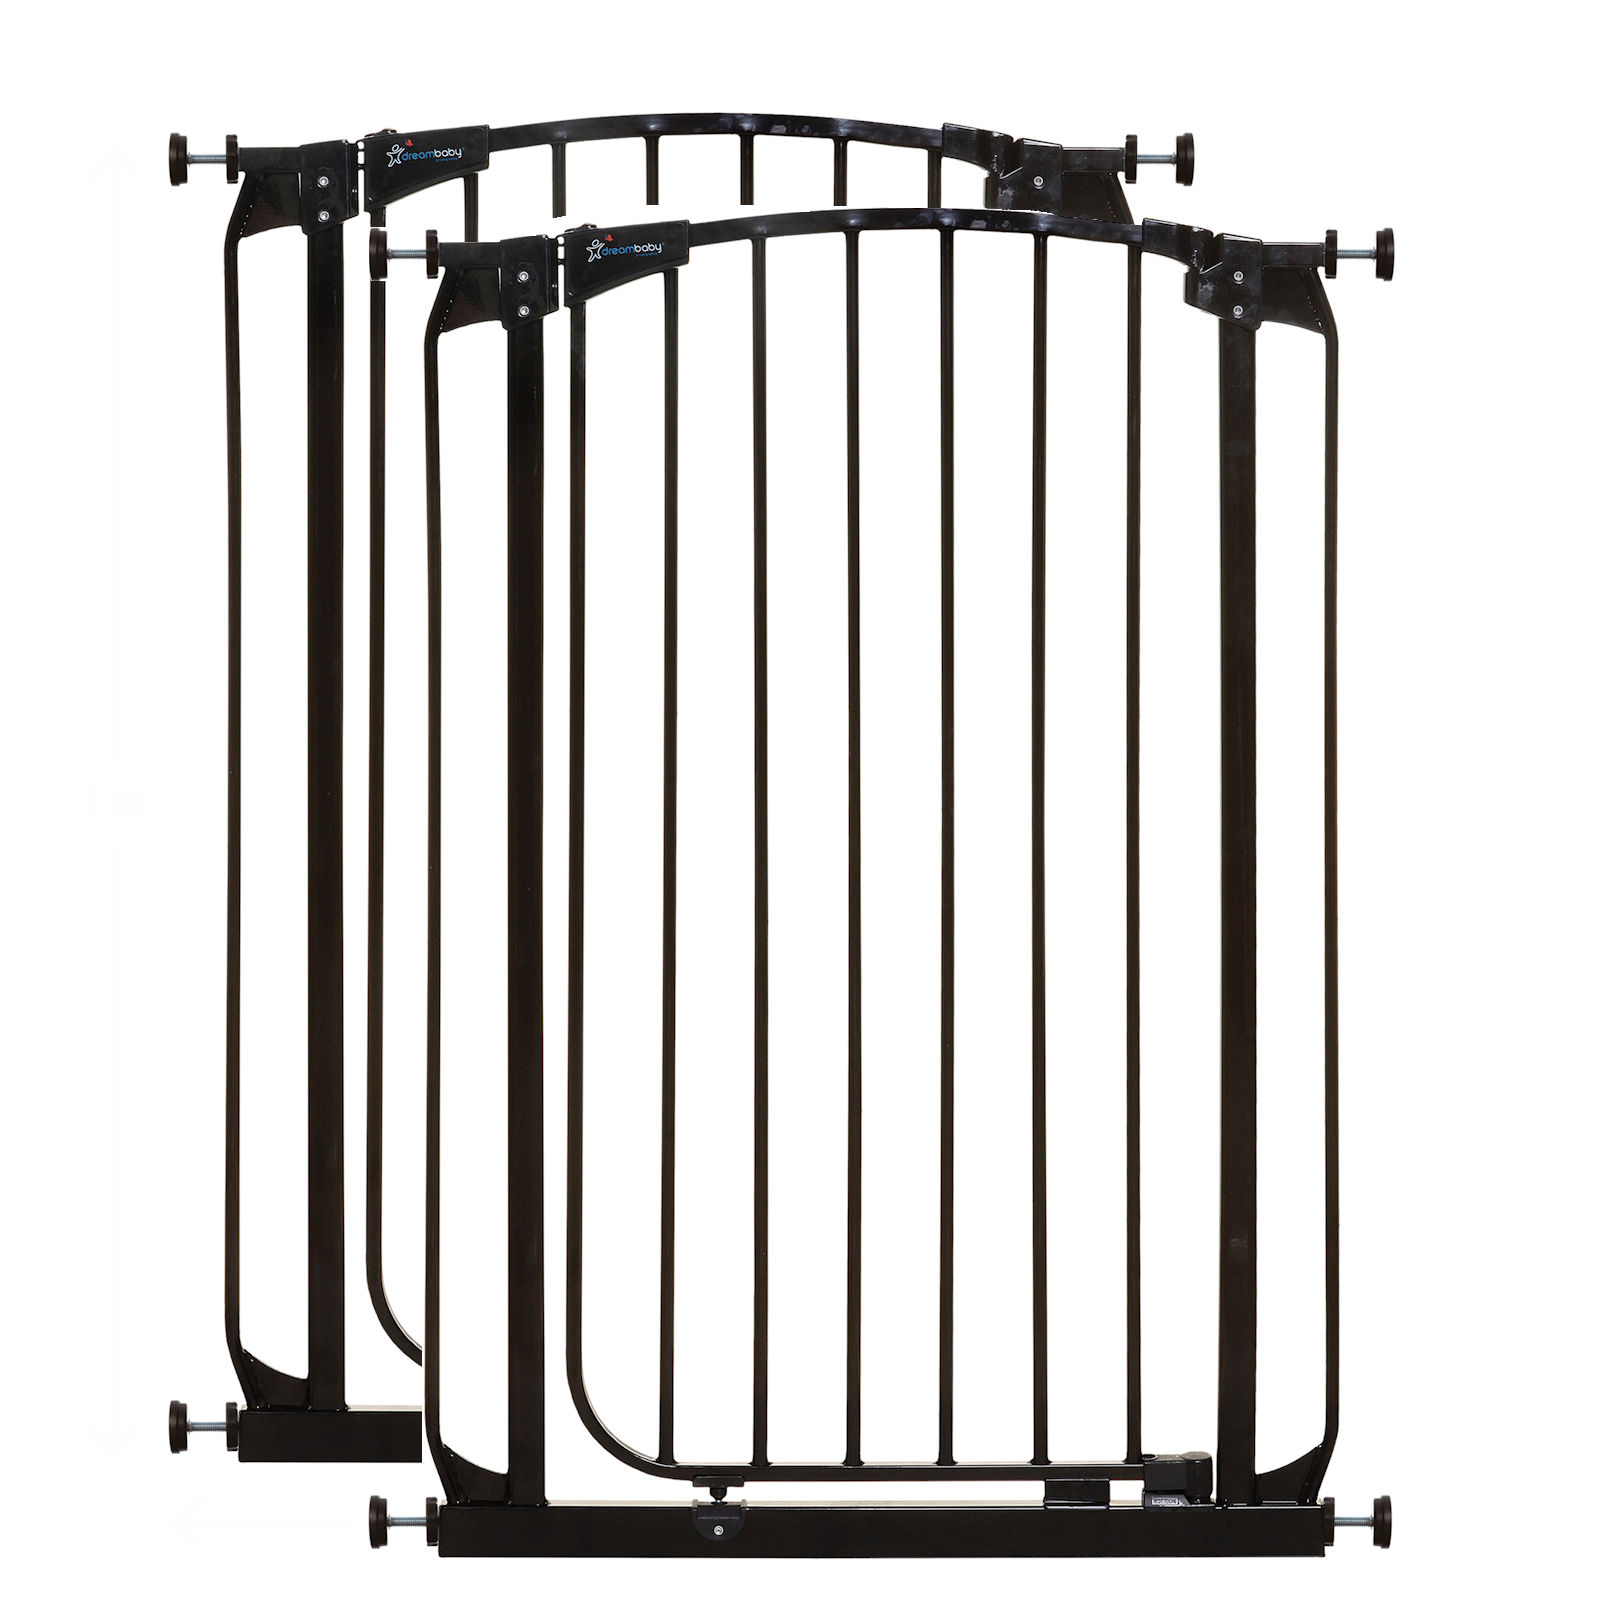 Dreambaby Chelsea Extra Tall Auto-Close Pressure Mounted Metal Safety Gate (Pack of 2) - Black (71-80cm)